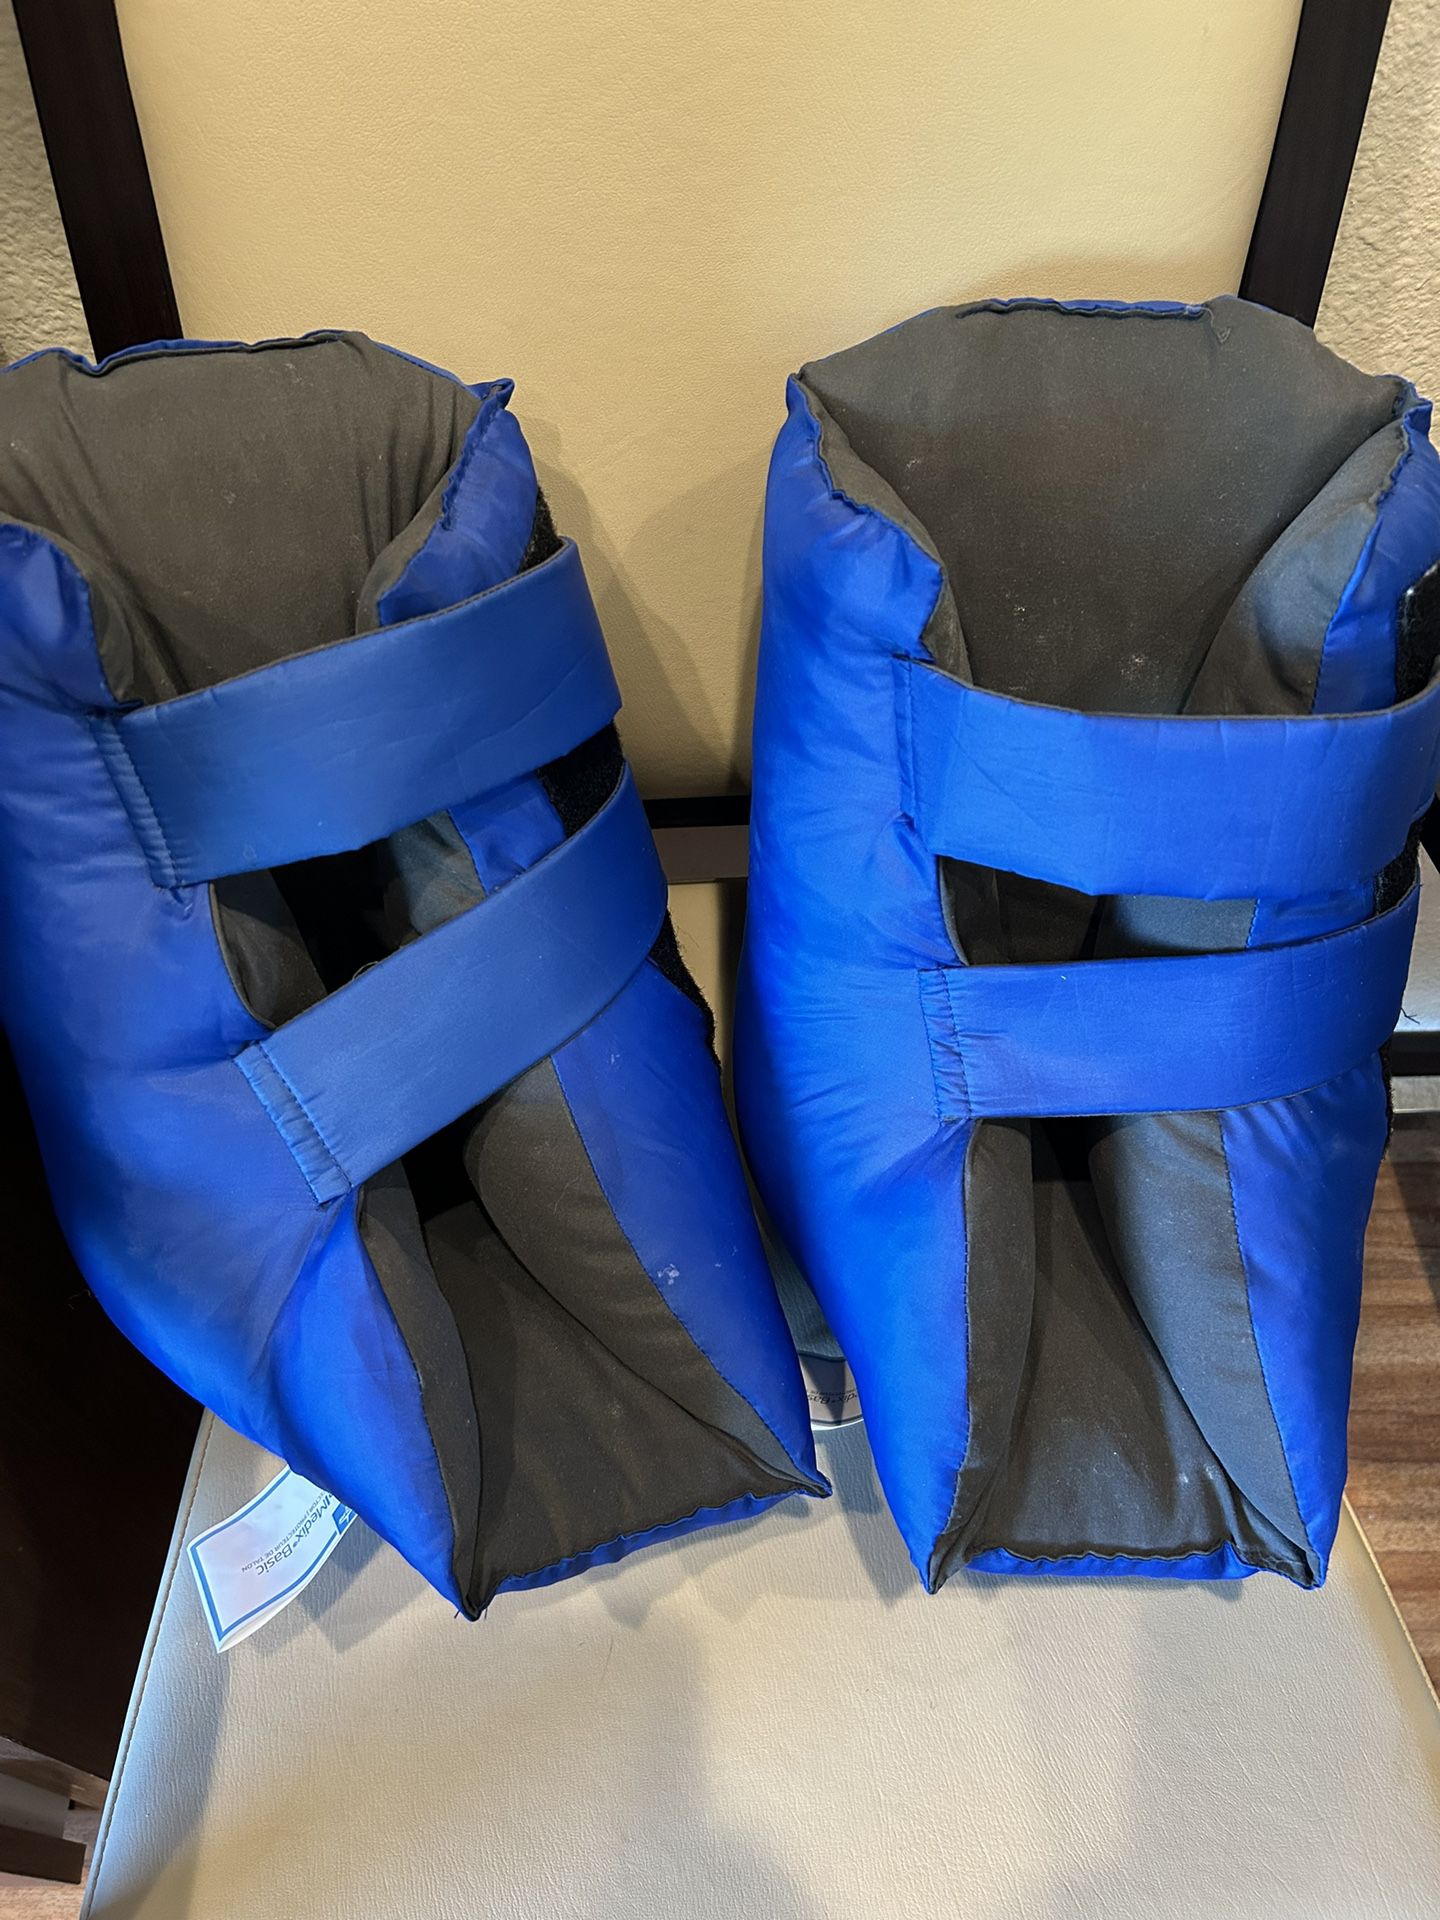 Blue Heel Protecting Boots And 2 Pressure Relieving Pillow Wedges 